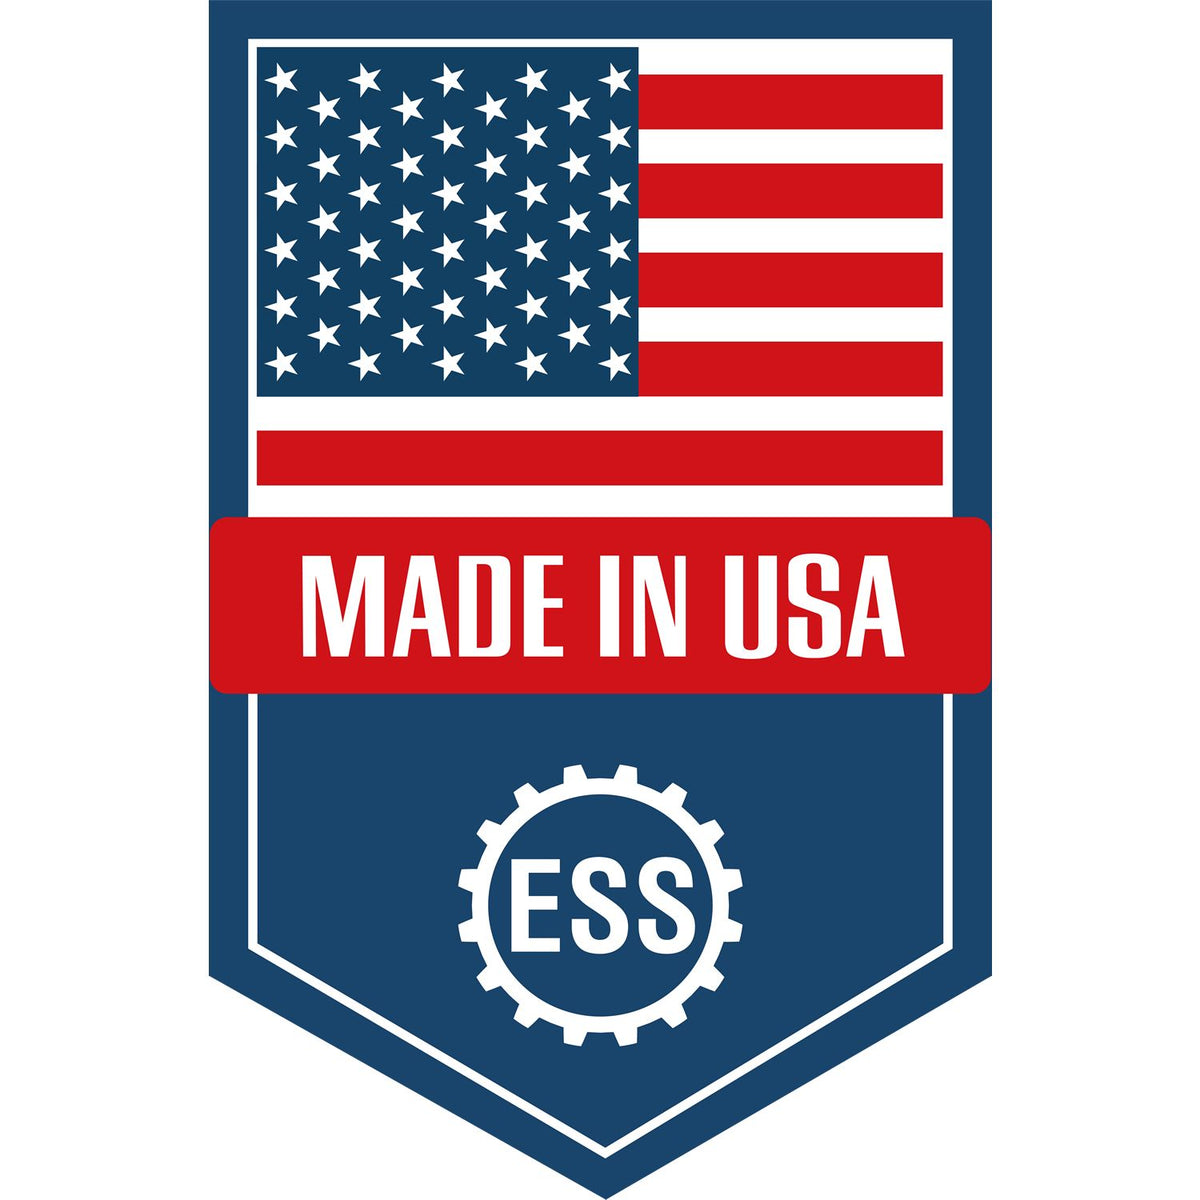 An icon or graphic with an american flag and text reading Made in USA for the Slim Pre-Inked Massachusetts Professional Engineer Seal Stamp